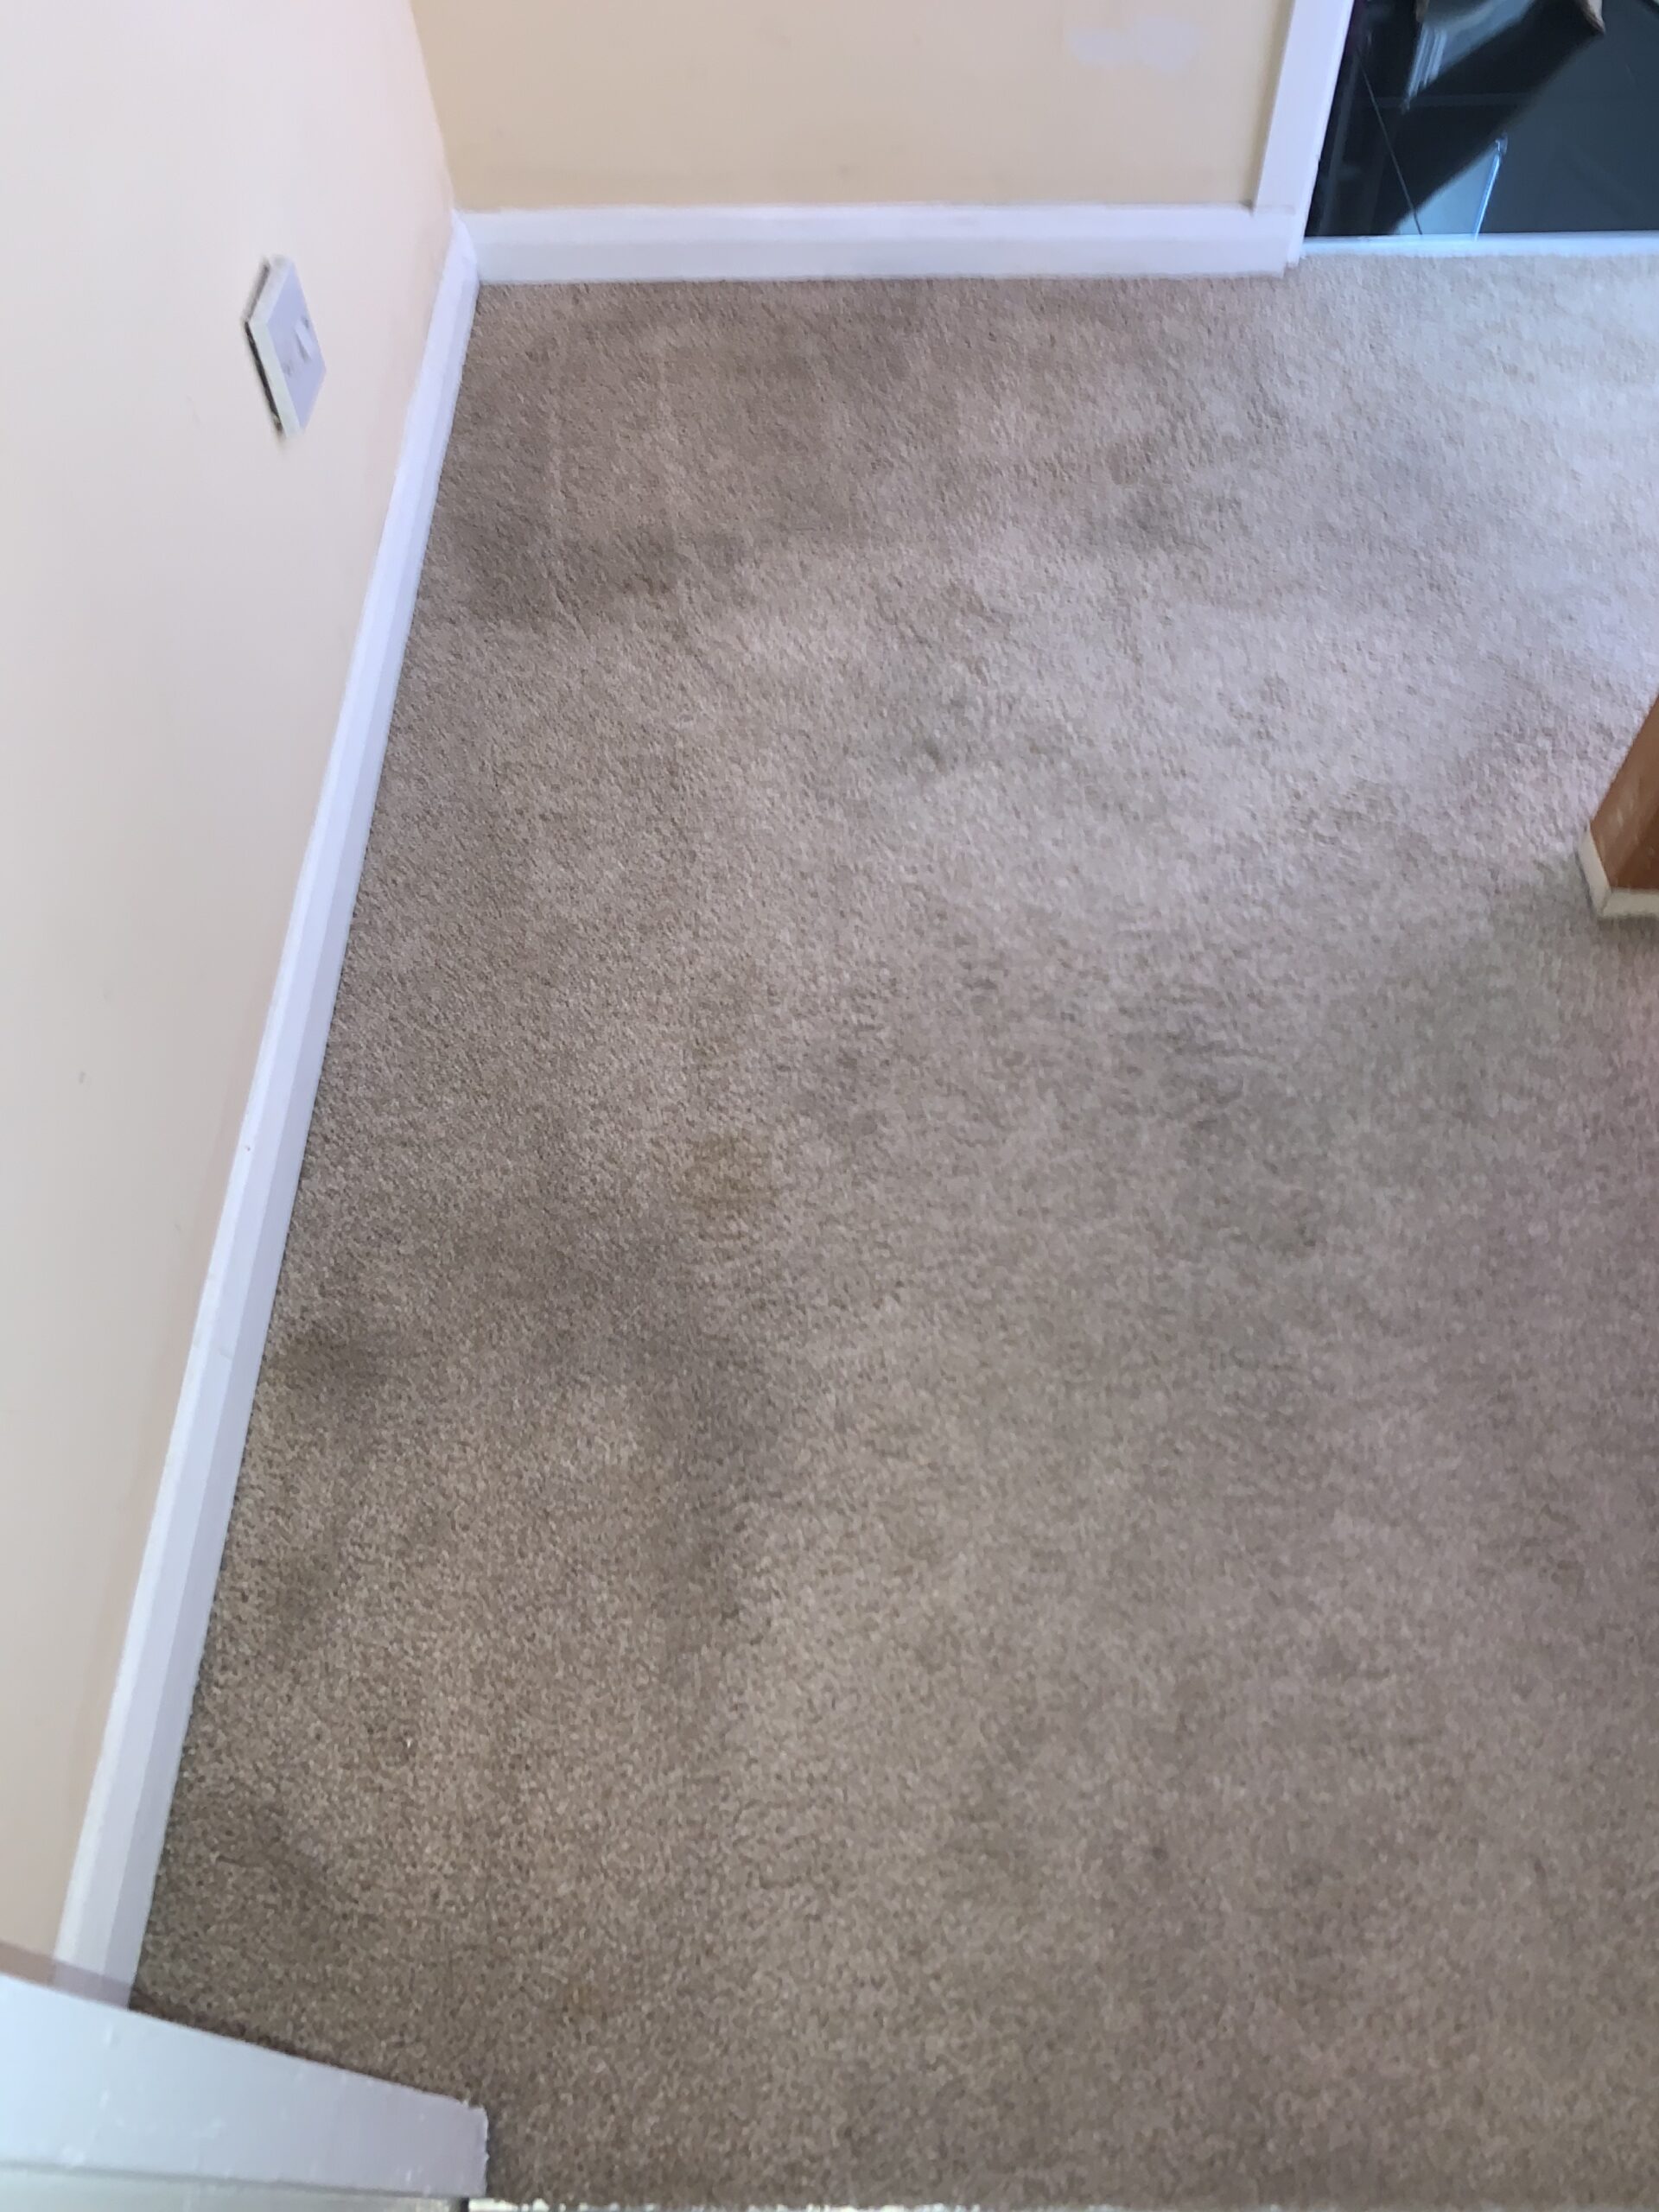 Cleaning carpet without professional carpet cleaning machine